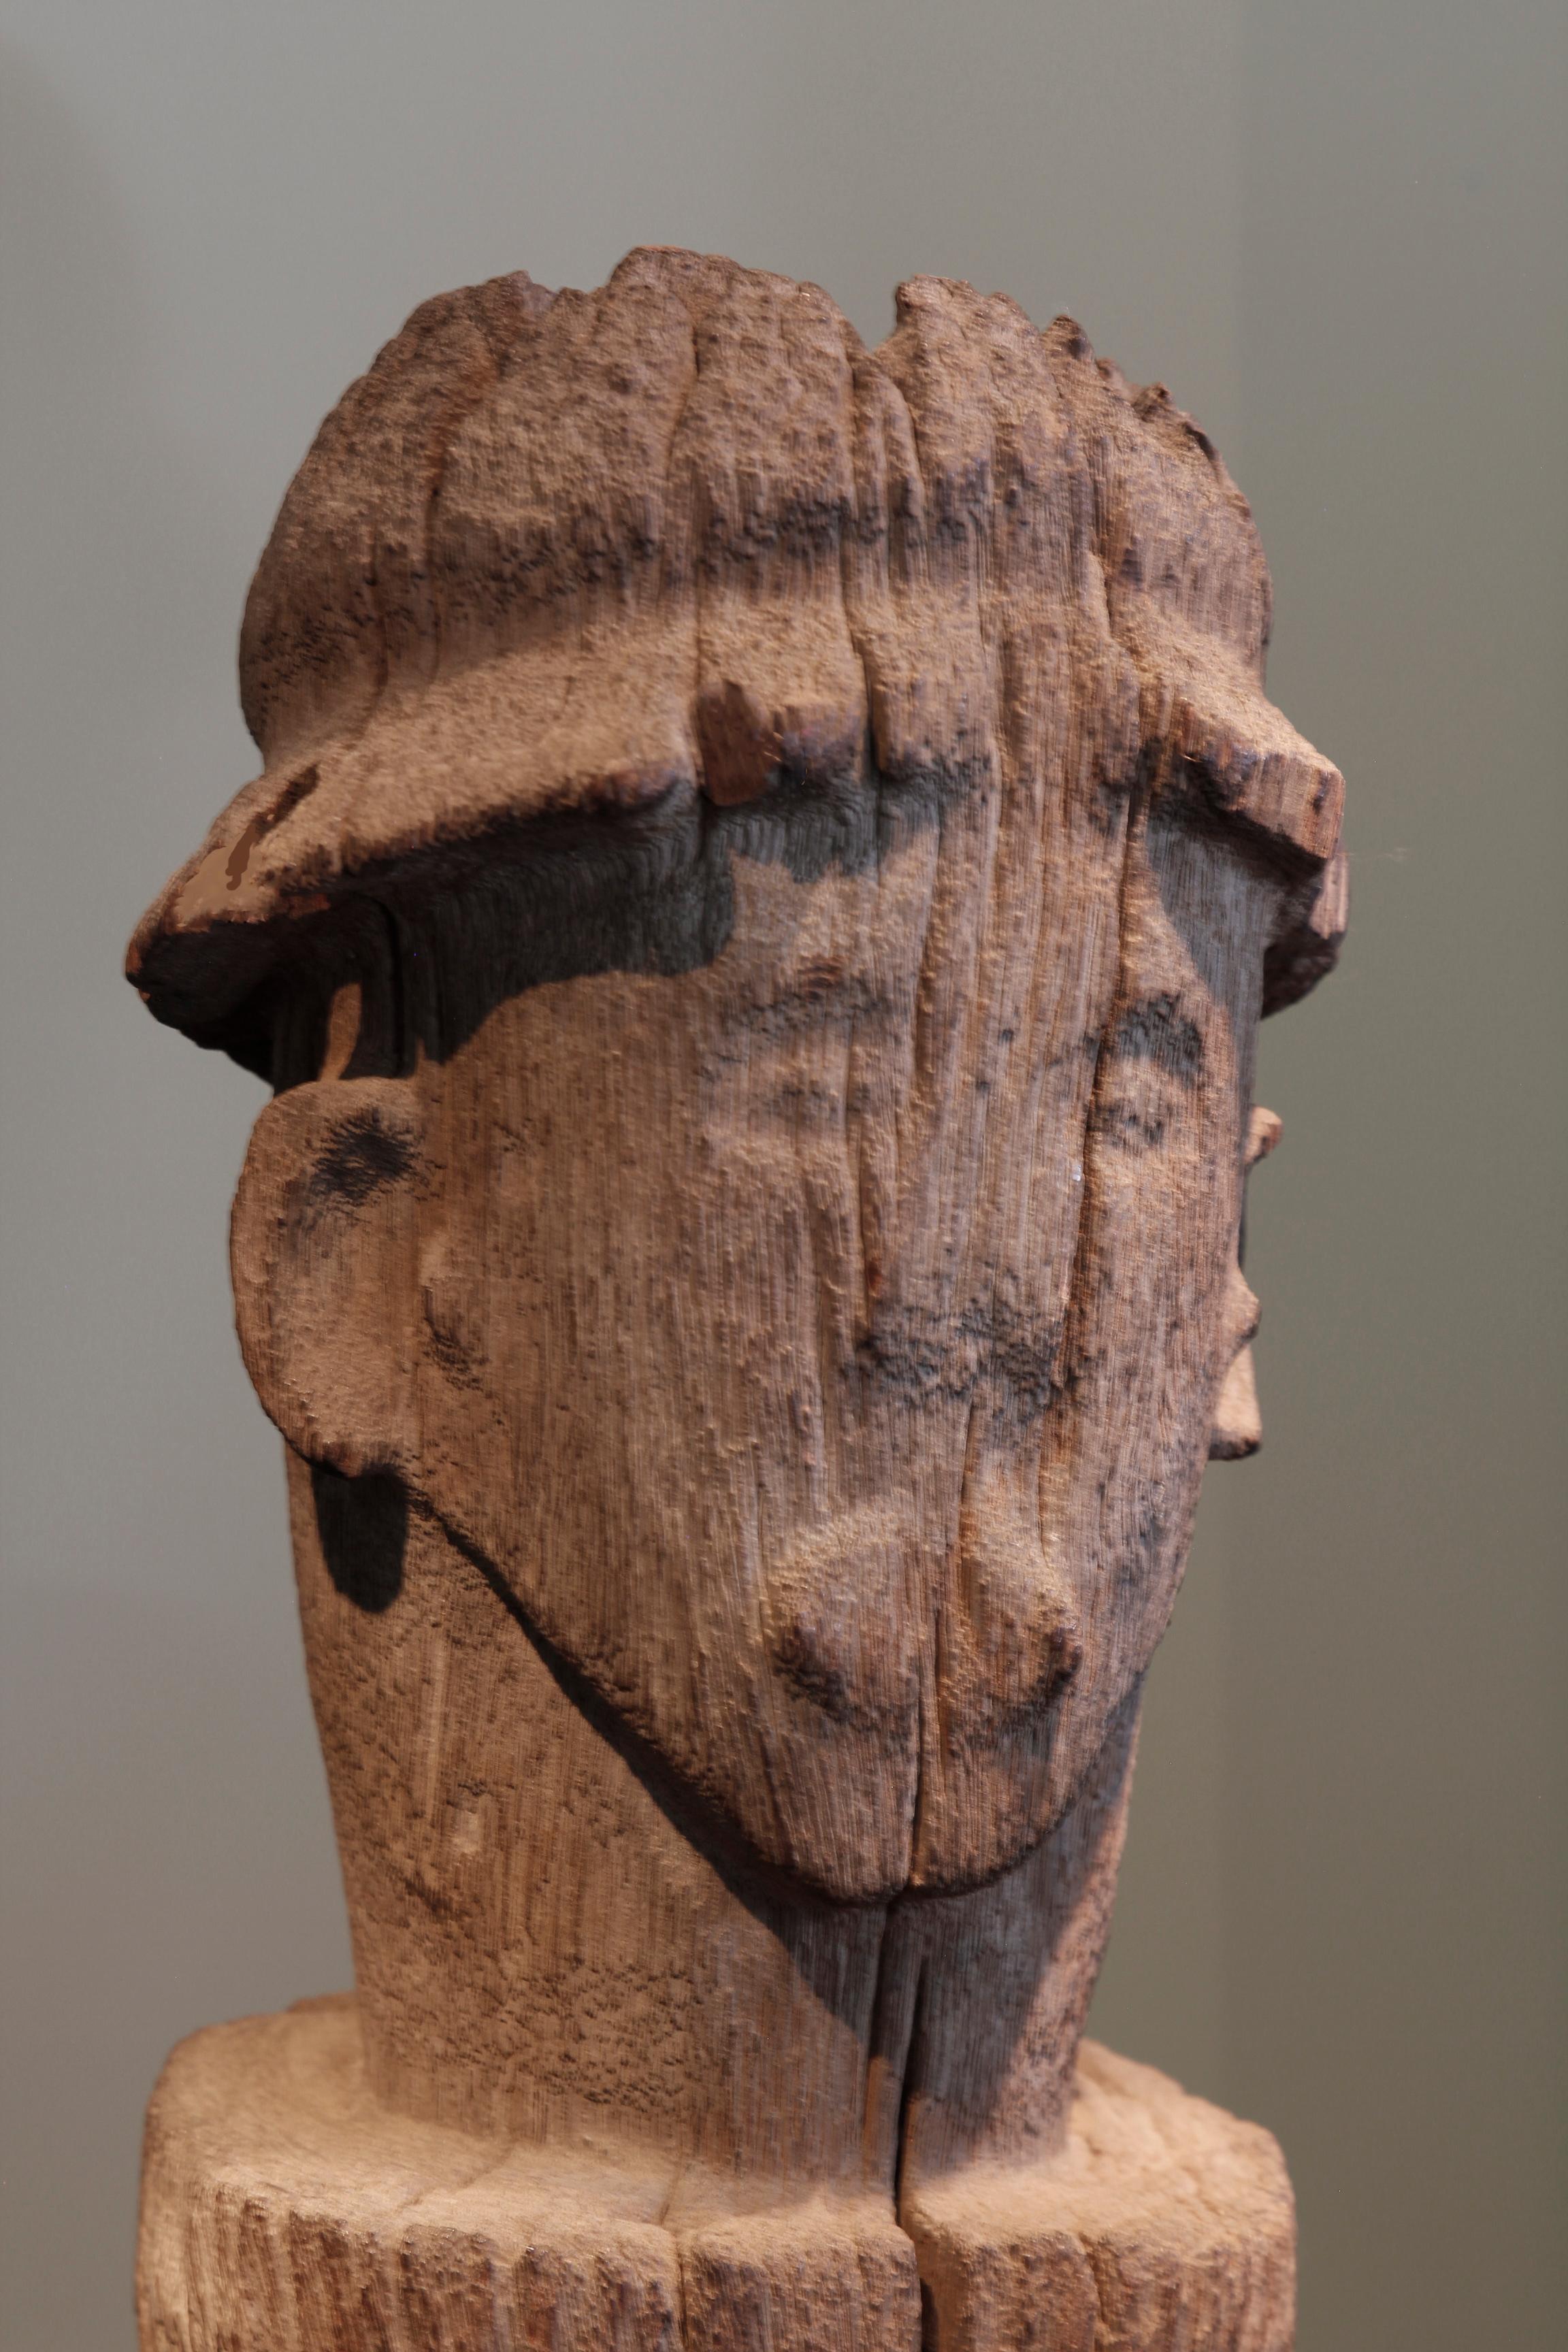 This fine early twentieth-century ancestral post, from the Bongo culture in South Sudan, takes the form of a tall, multiple-ringed column. Carved from a hard wood, the post exhibits a beautiful weathered, worn and bleached surface. Surmounting the